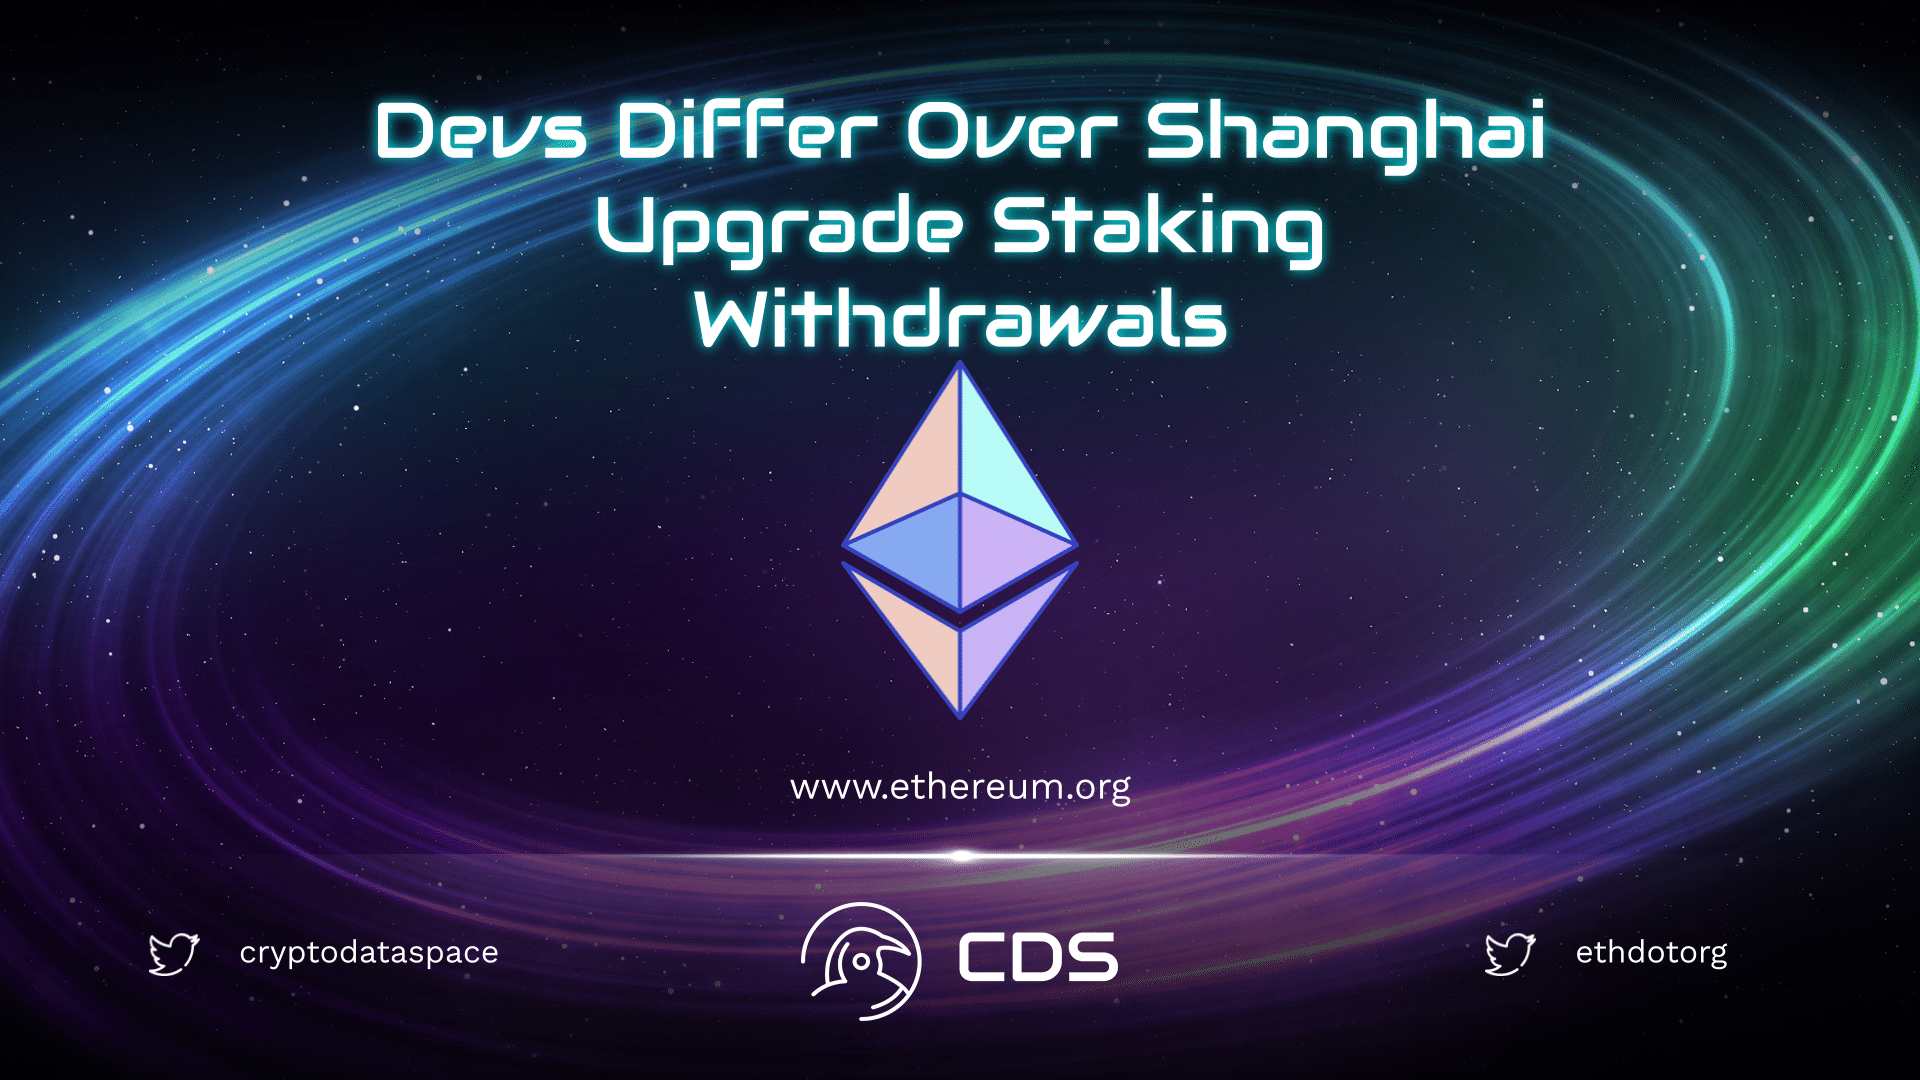 Devs Differ Over Shanghai Upgrade Staking Withdrawals